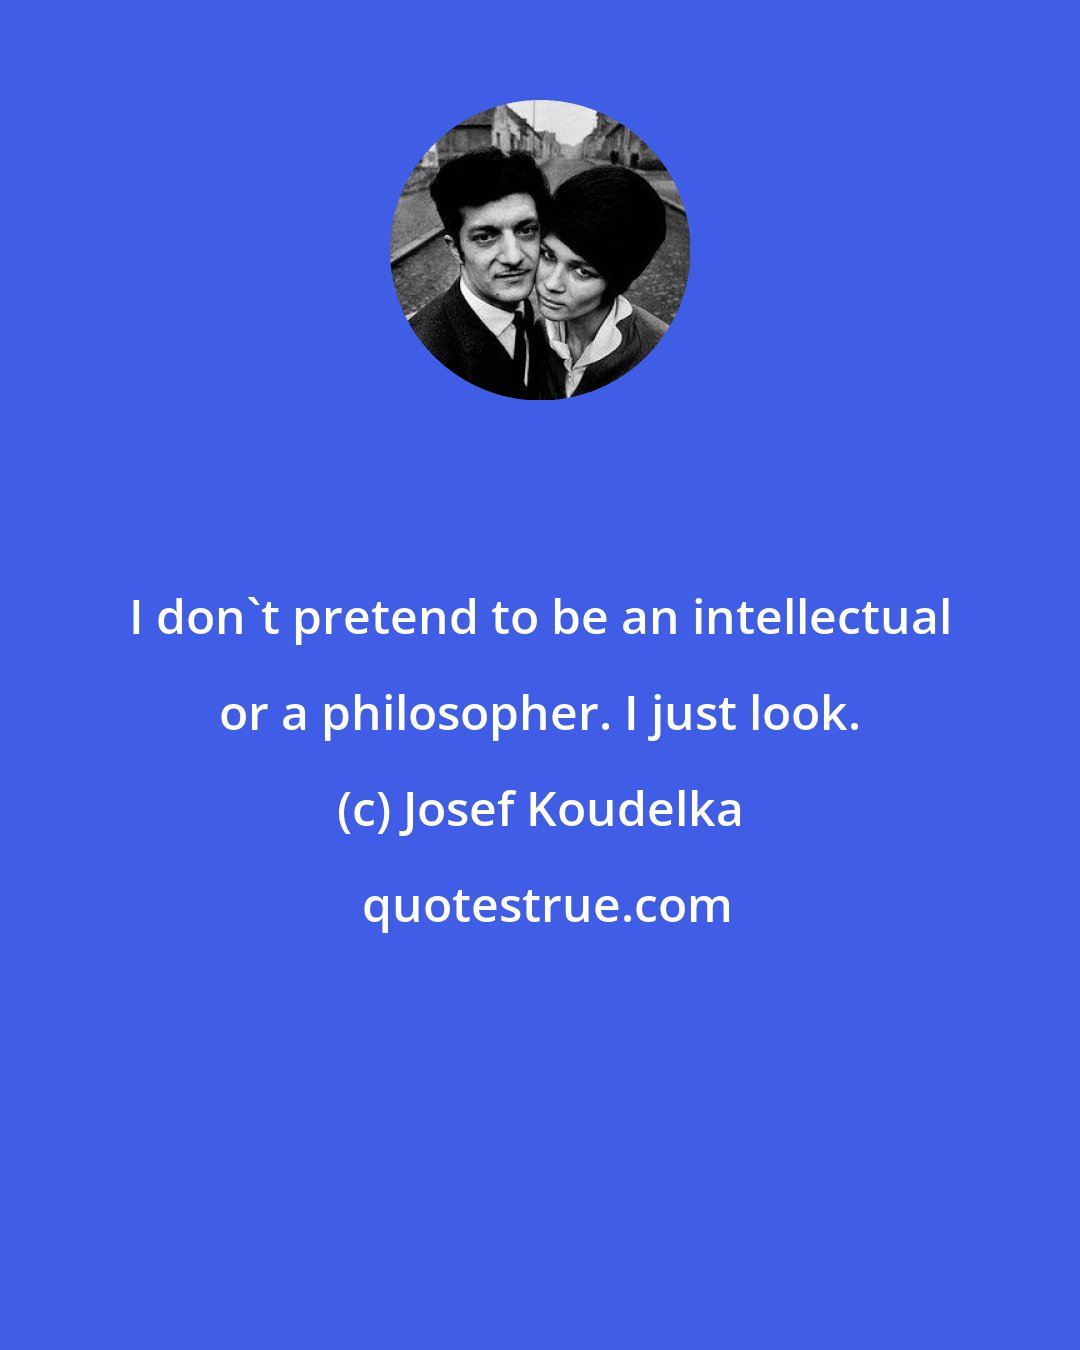 Josef Koudelka: I don't pretend to be an intellectual or a philosopher. I just look.